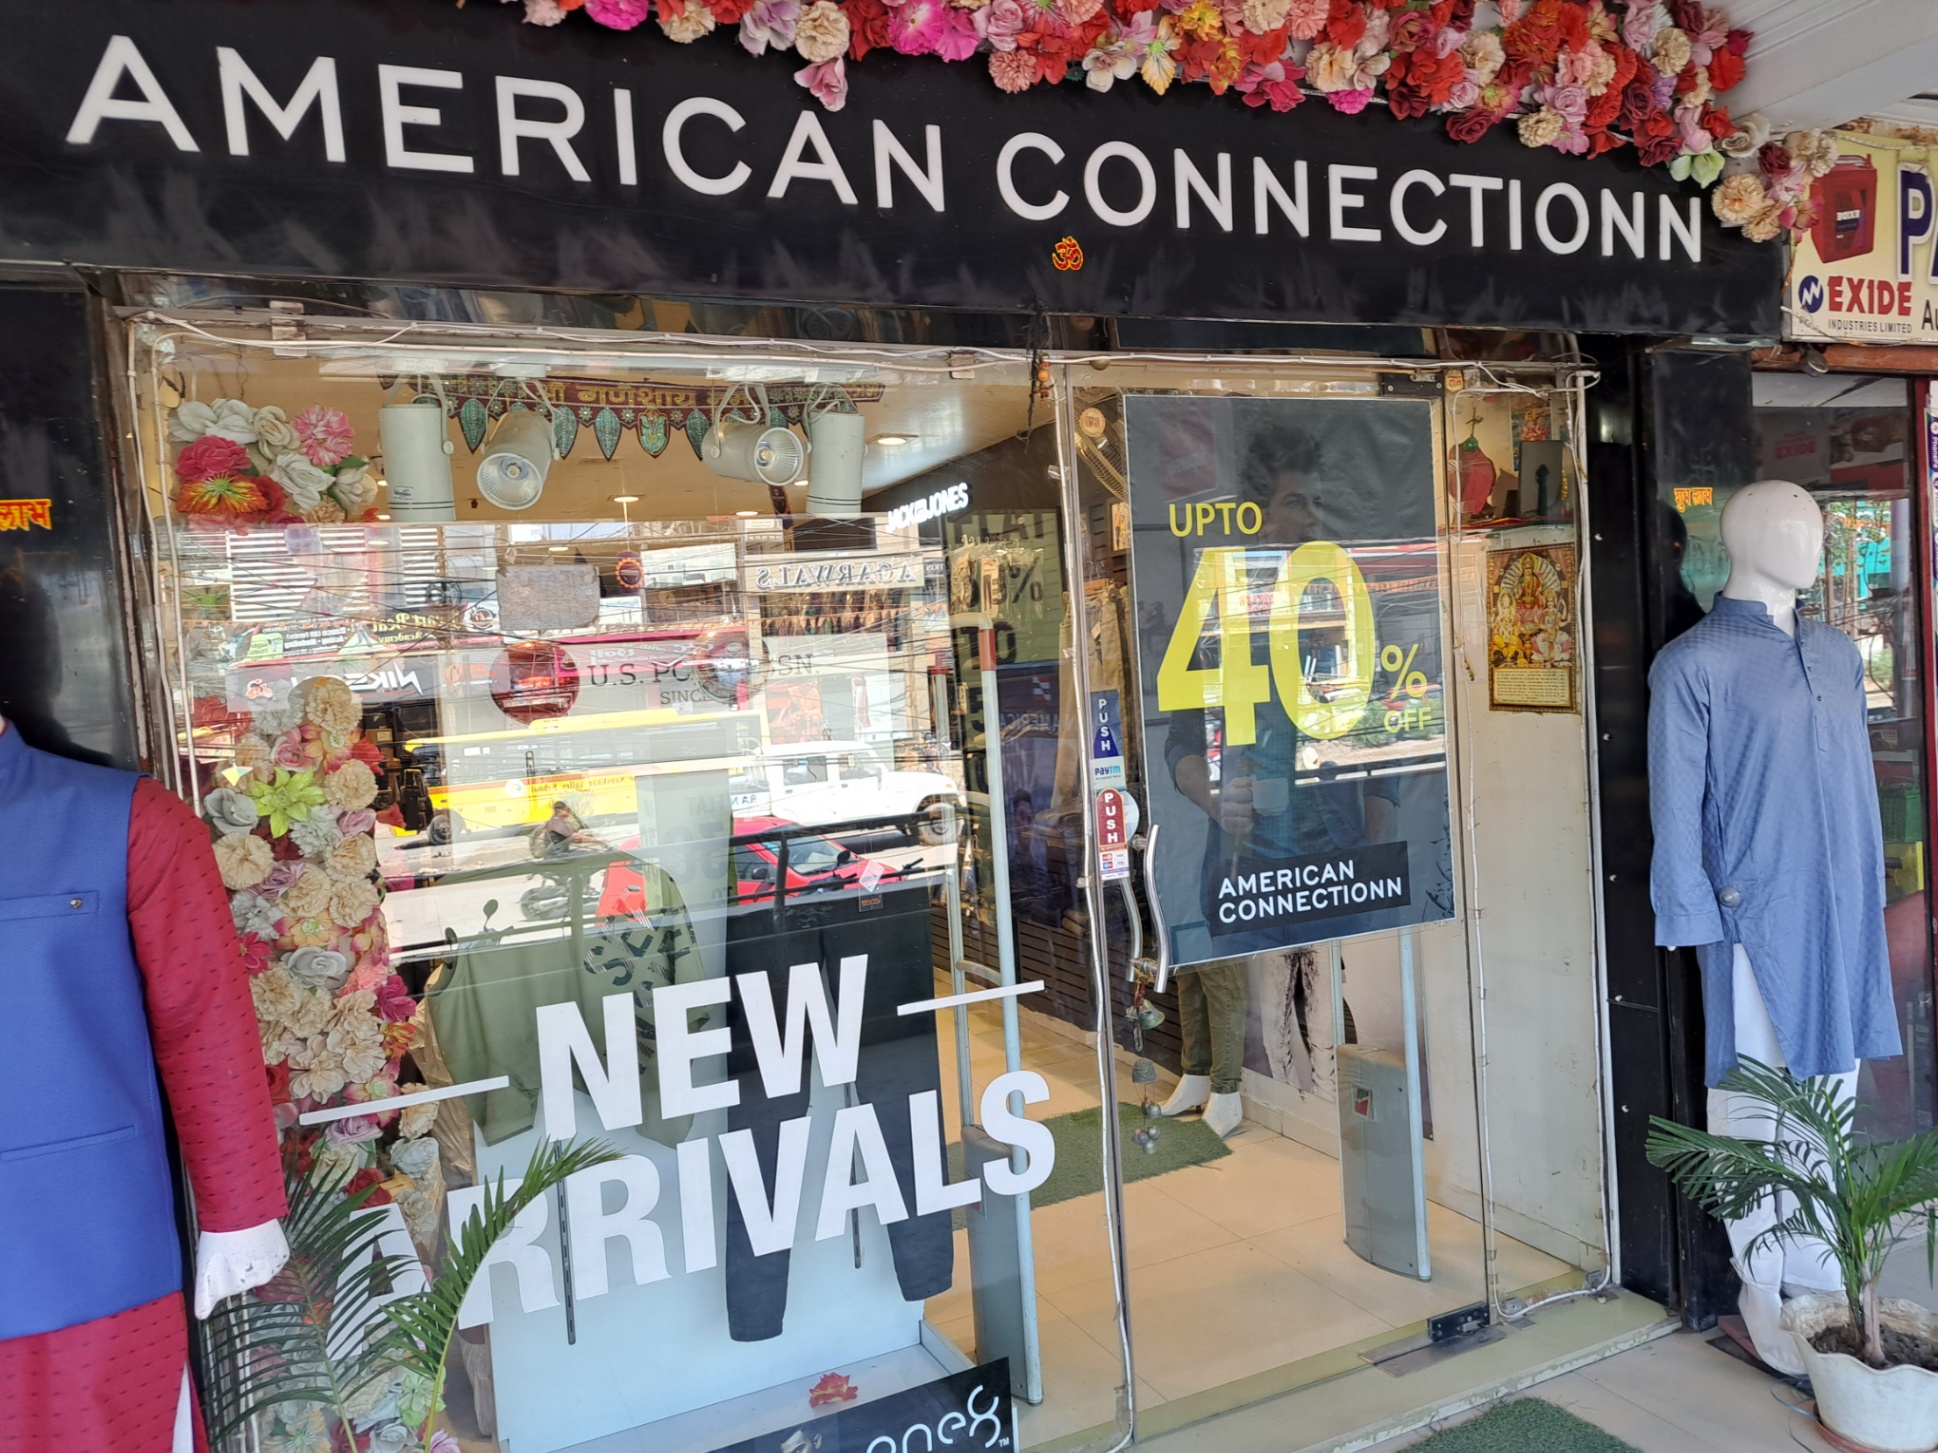 Upto ₹40 off Deal @Americon Connectionn, New Market, Bhopal